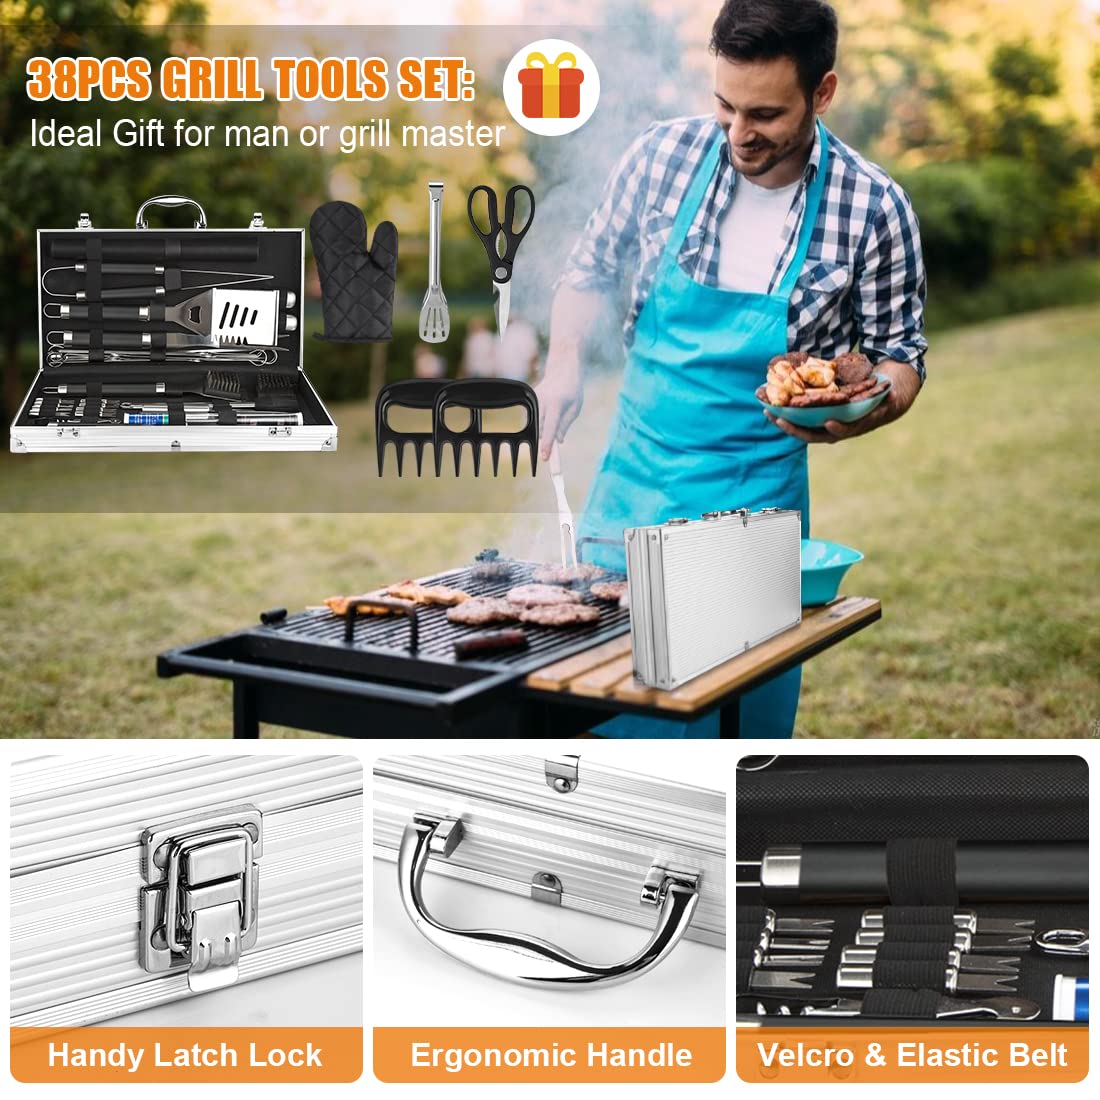 BBQ Grill Accessories Set, 38Pcs Stainless Steel Grill Tools Grilling Accessories with Aluminum Case, Thermometer, Grill Mats for Camping/Backyard Barbecue, Grill Utensils Set for Men Women - image 4 of 7